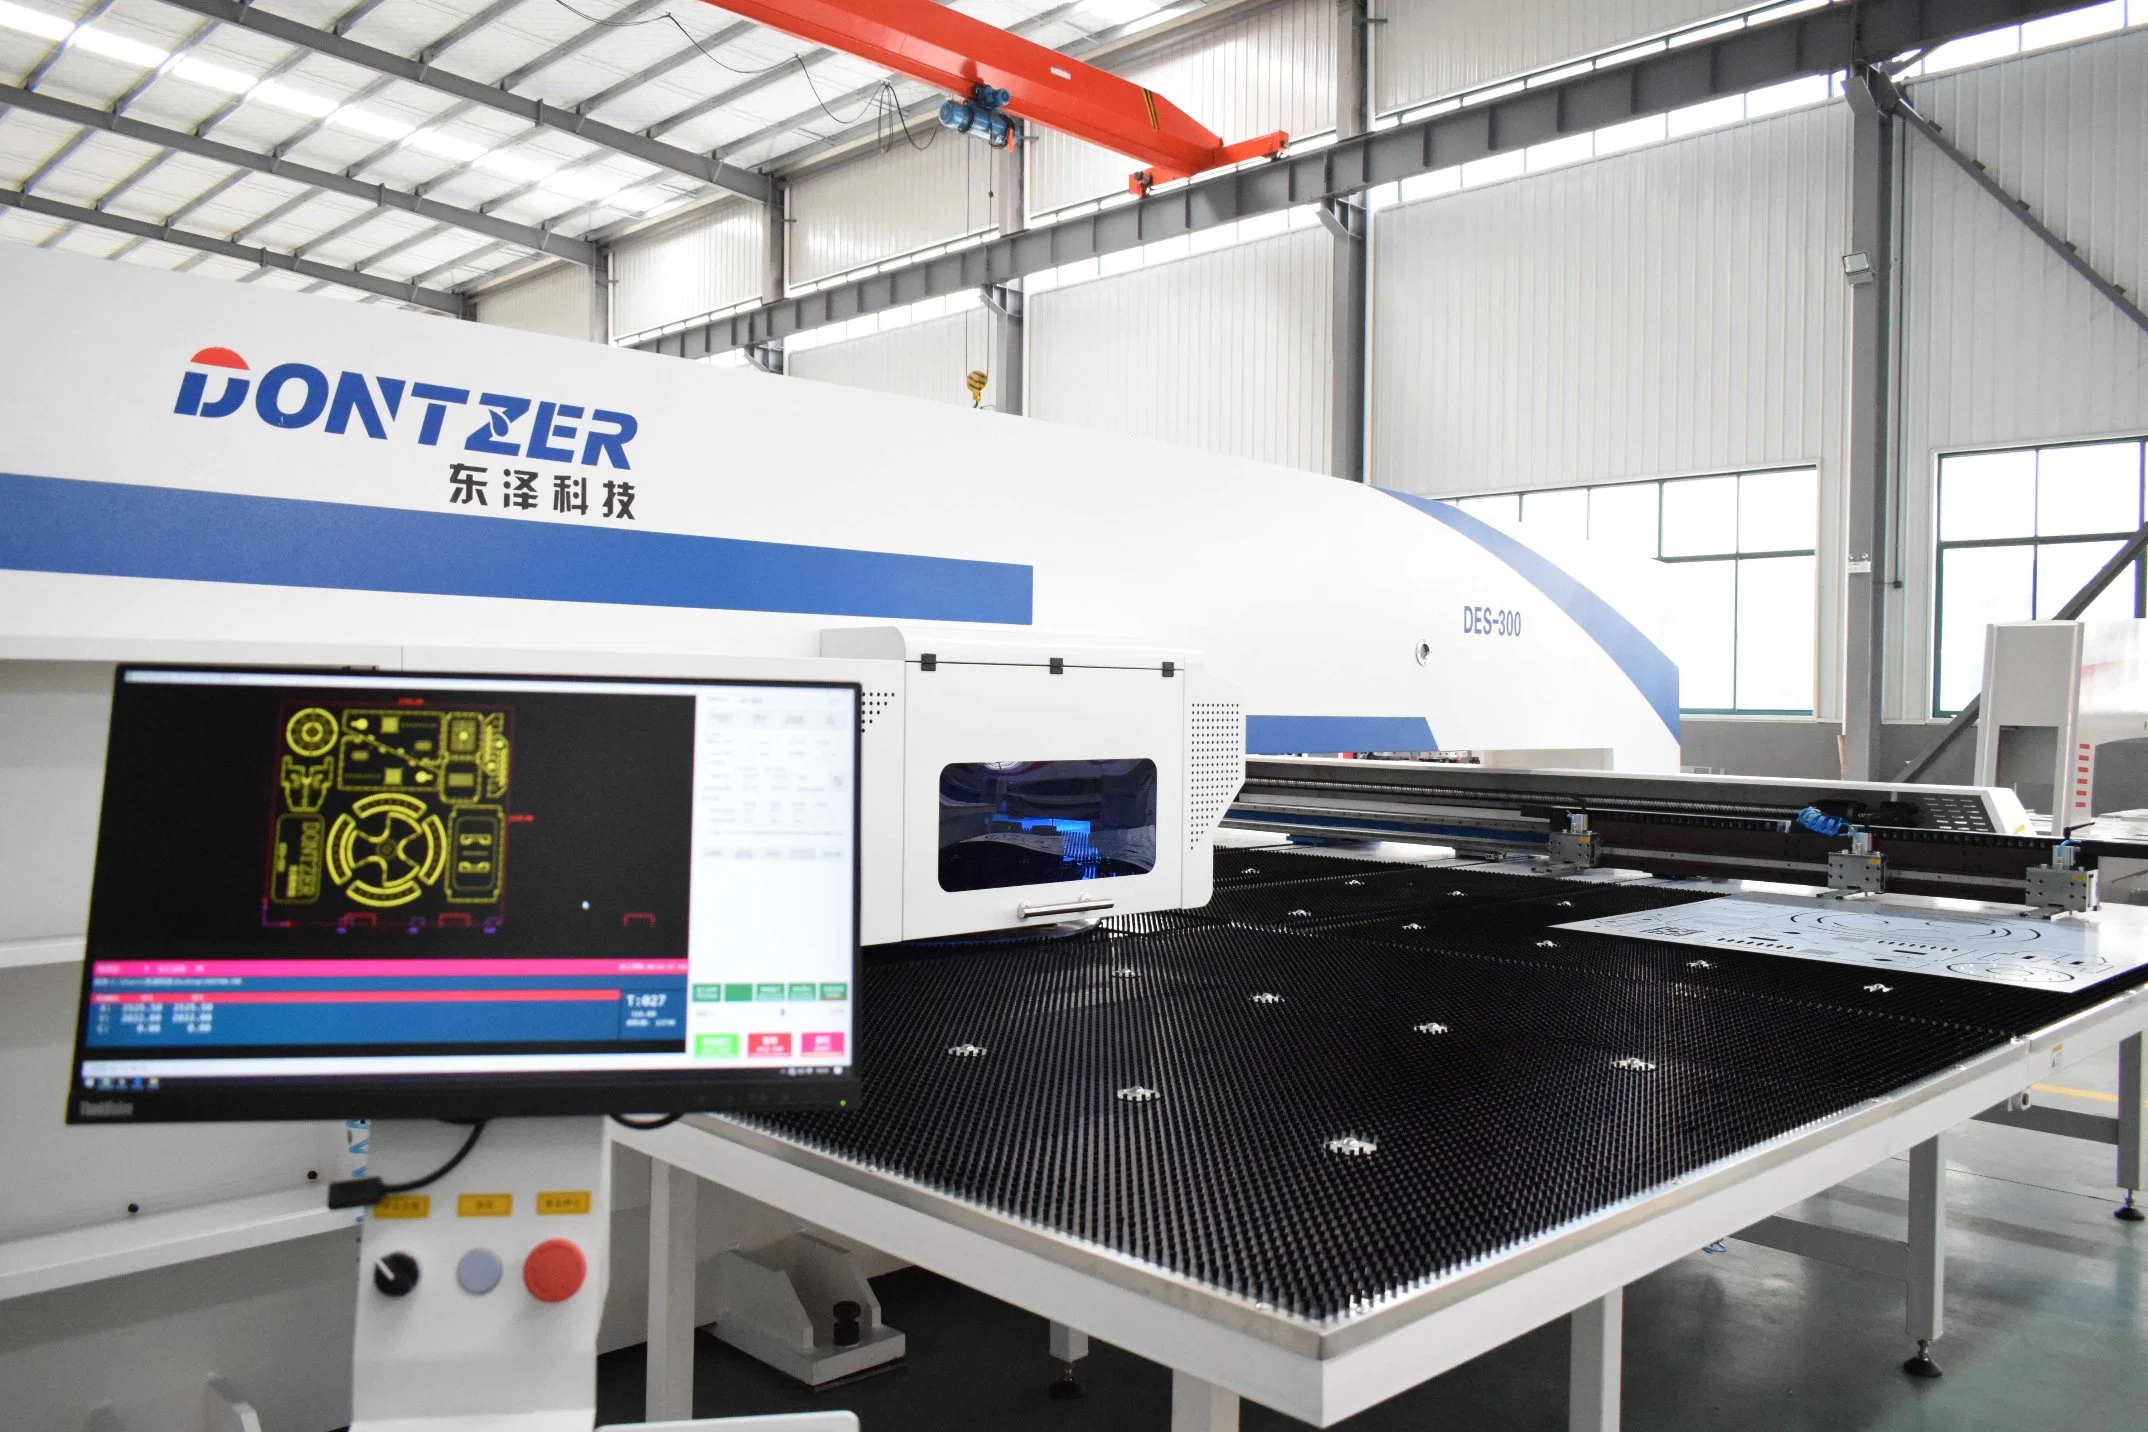 Auto Loading, 32 Tool Station, Cutting Rolling Press Metal Plate Hole CNC Punching Machine for Aluminum Copper Carbon Steel Coil Shutter